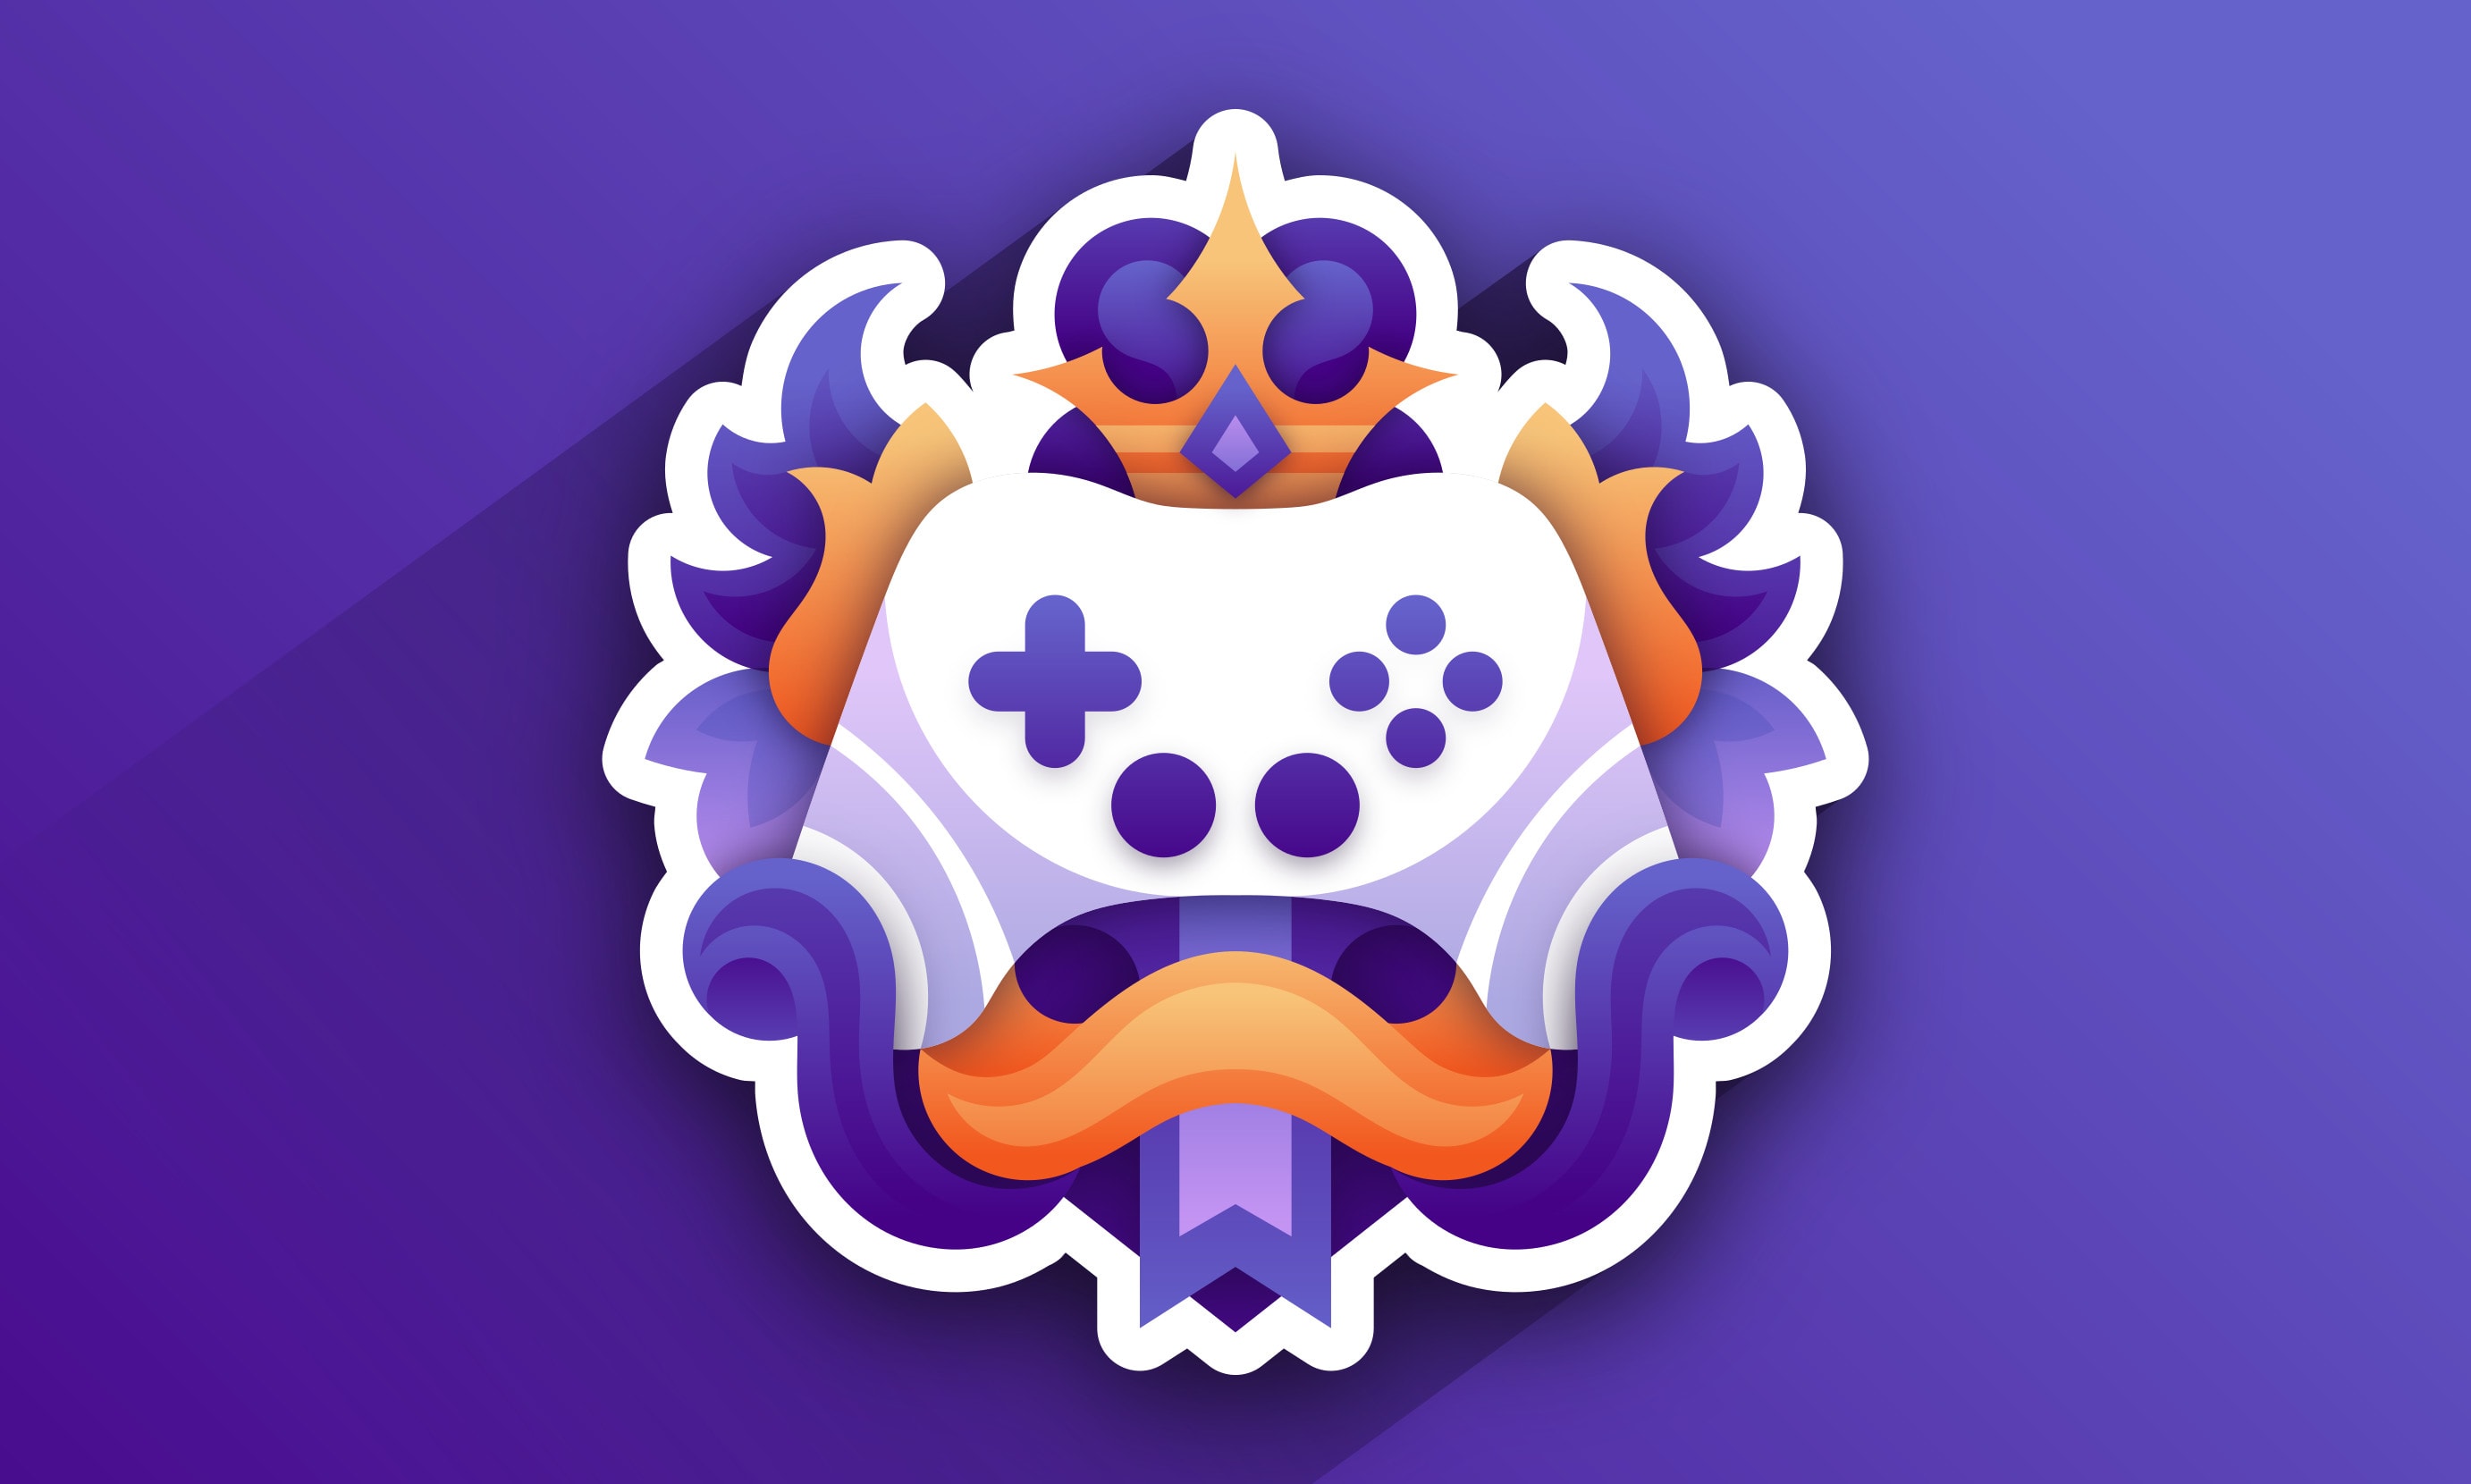 Discord Avatar Maker - Create your own Profile Pic or Server Logo